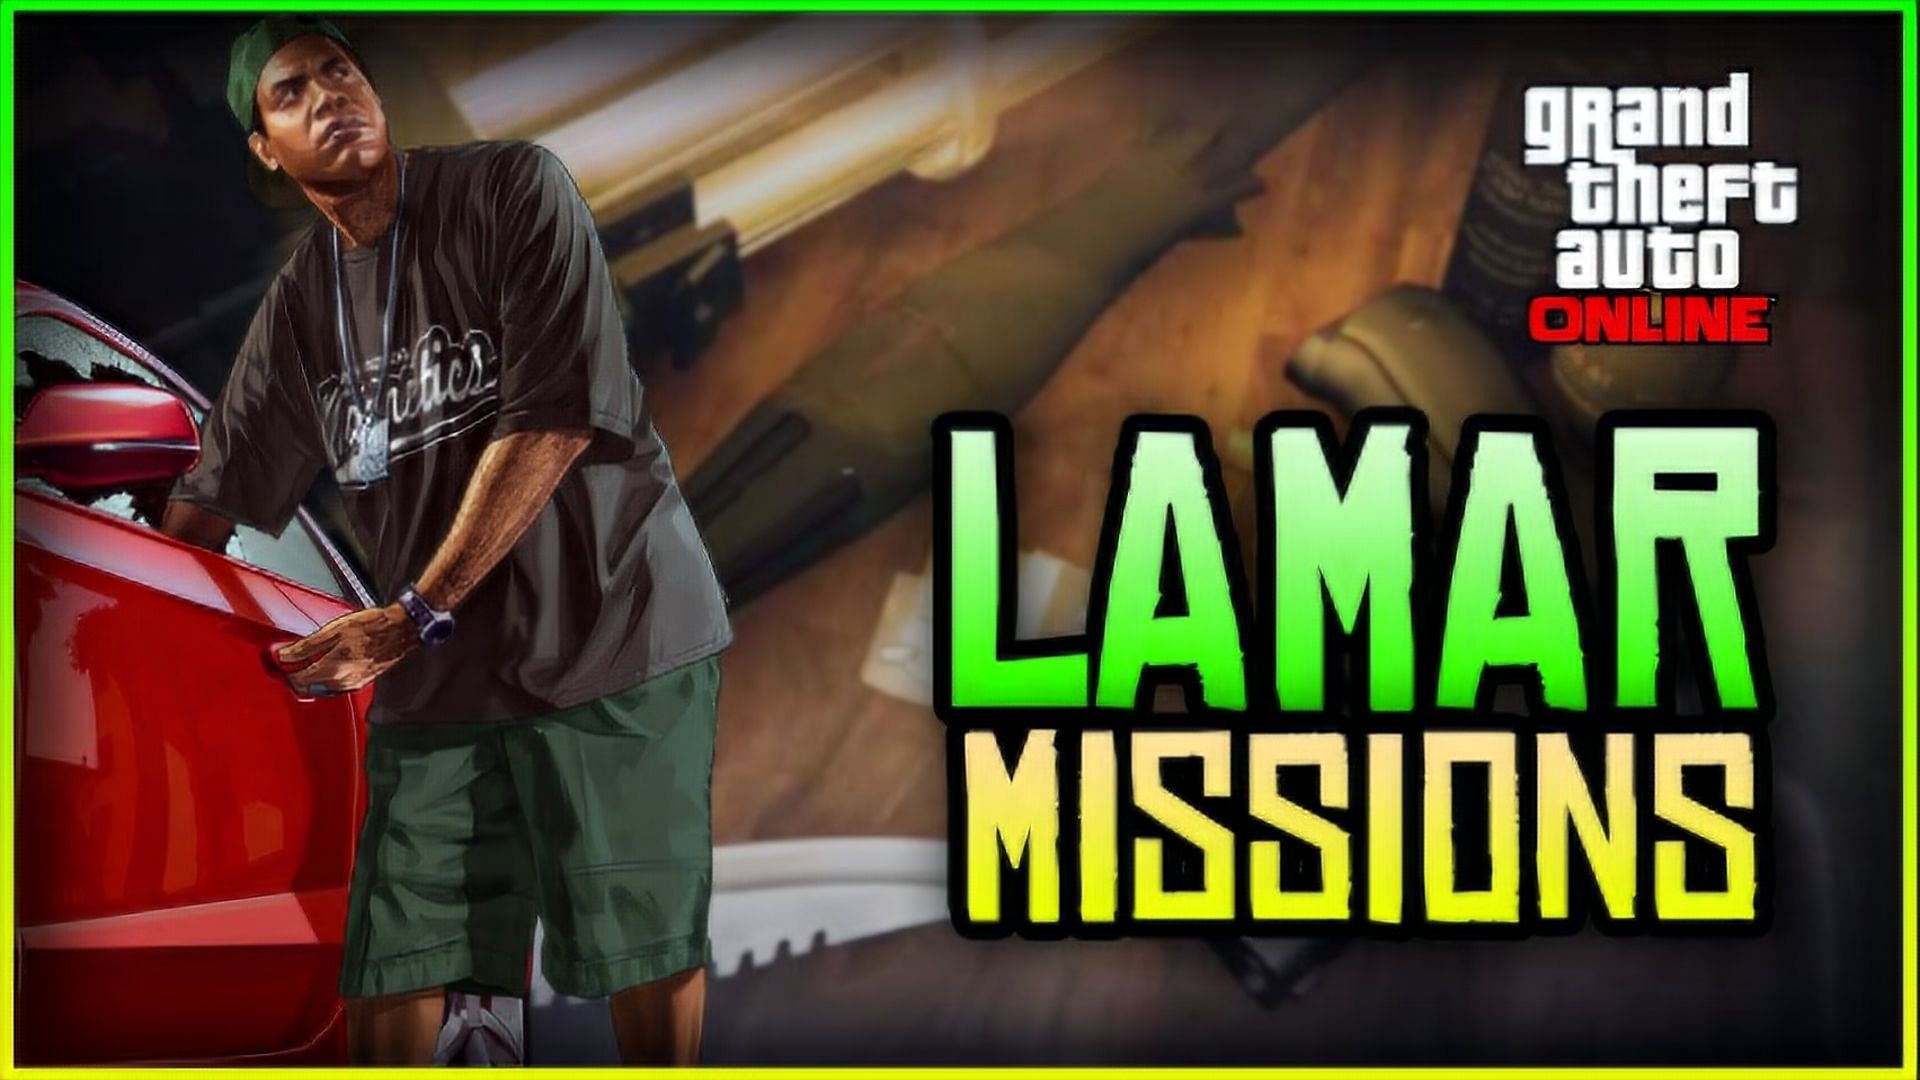 Lamar Missions in GTA Online. (Image via YouTube/Nought)